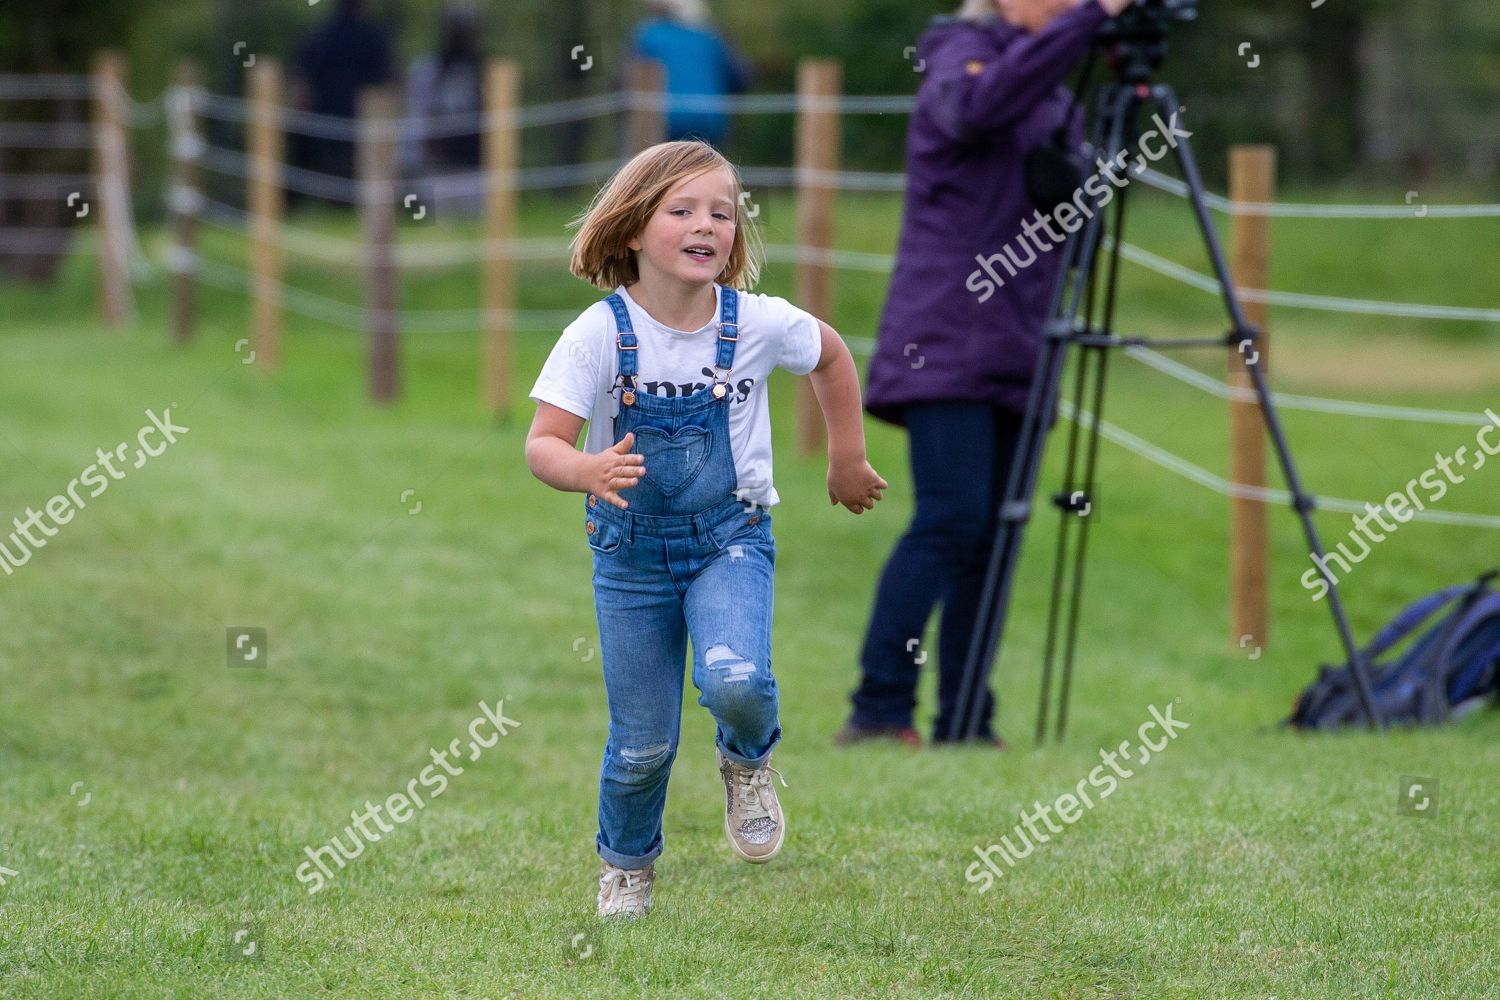 land-rover-burghley-horse-trials-day-3-stamford-lincolnshire-uk-shutterstock-editorial-10403945ah.jpg